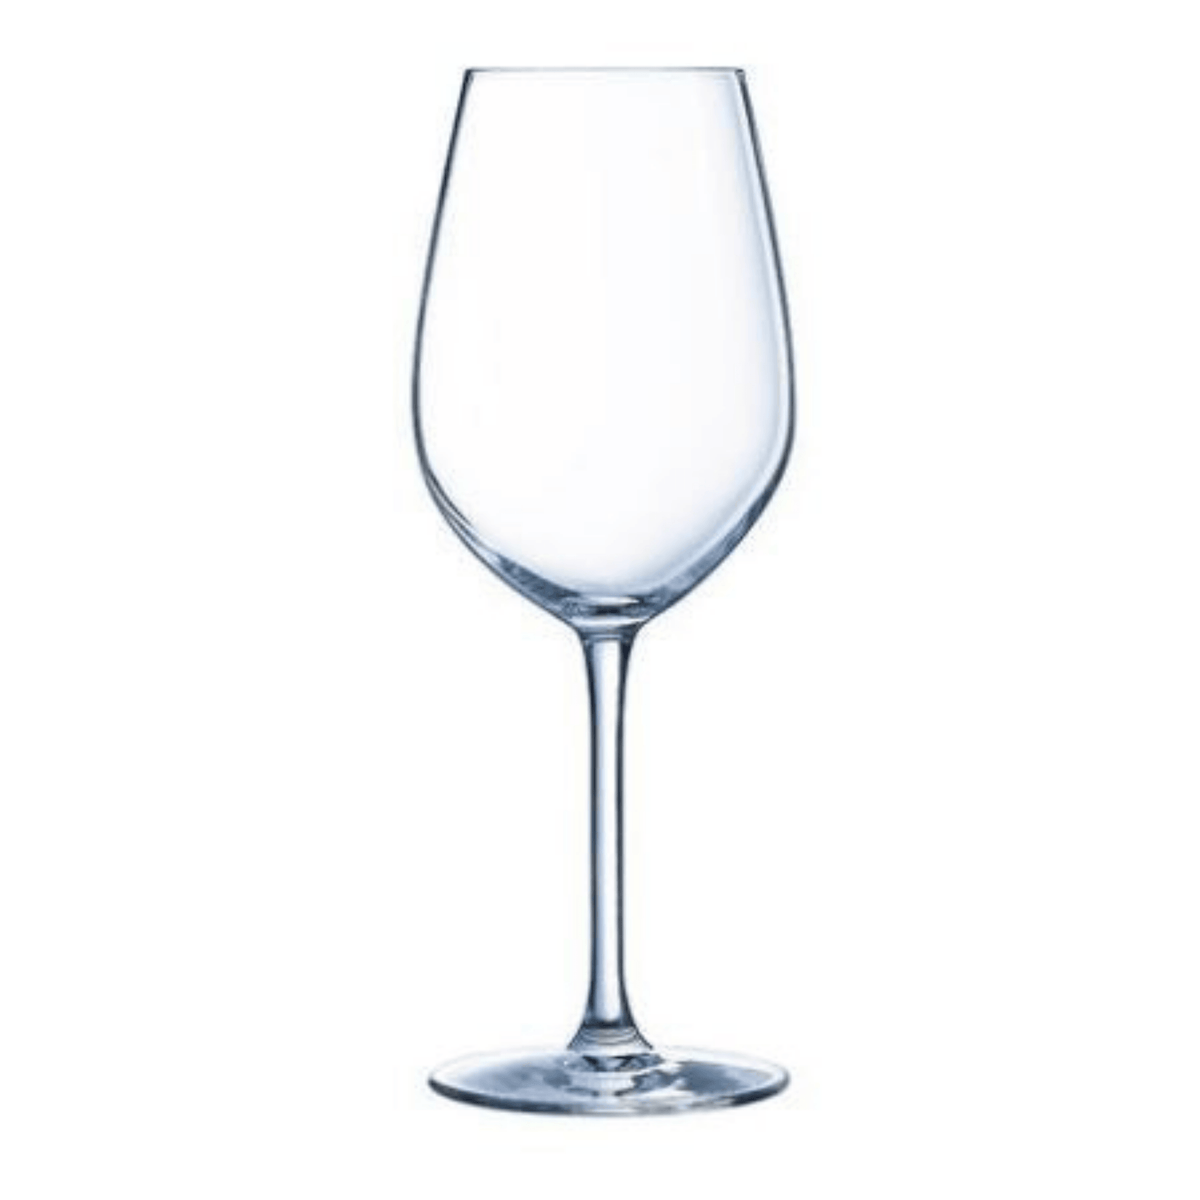 Chef & Sommelier's Sequence Wine Glass 44cl - BESPOKE77